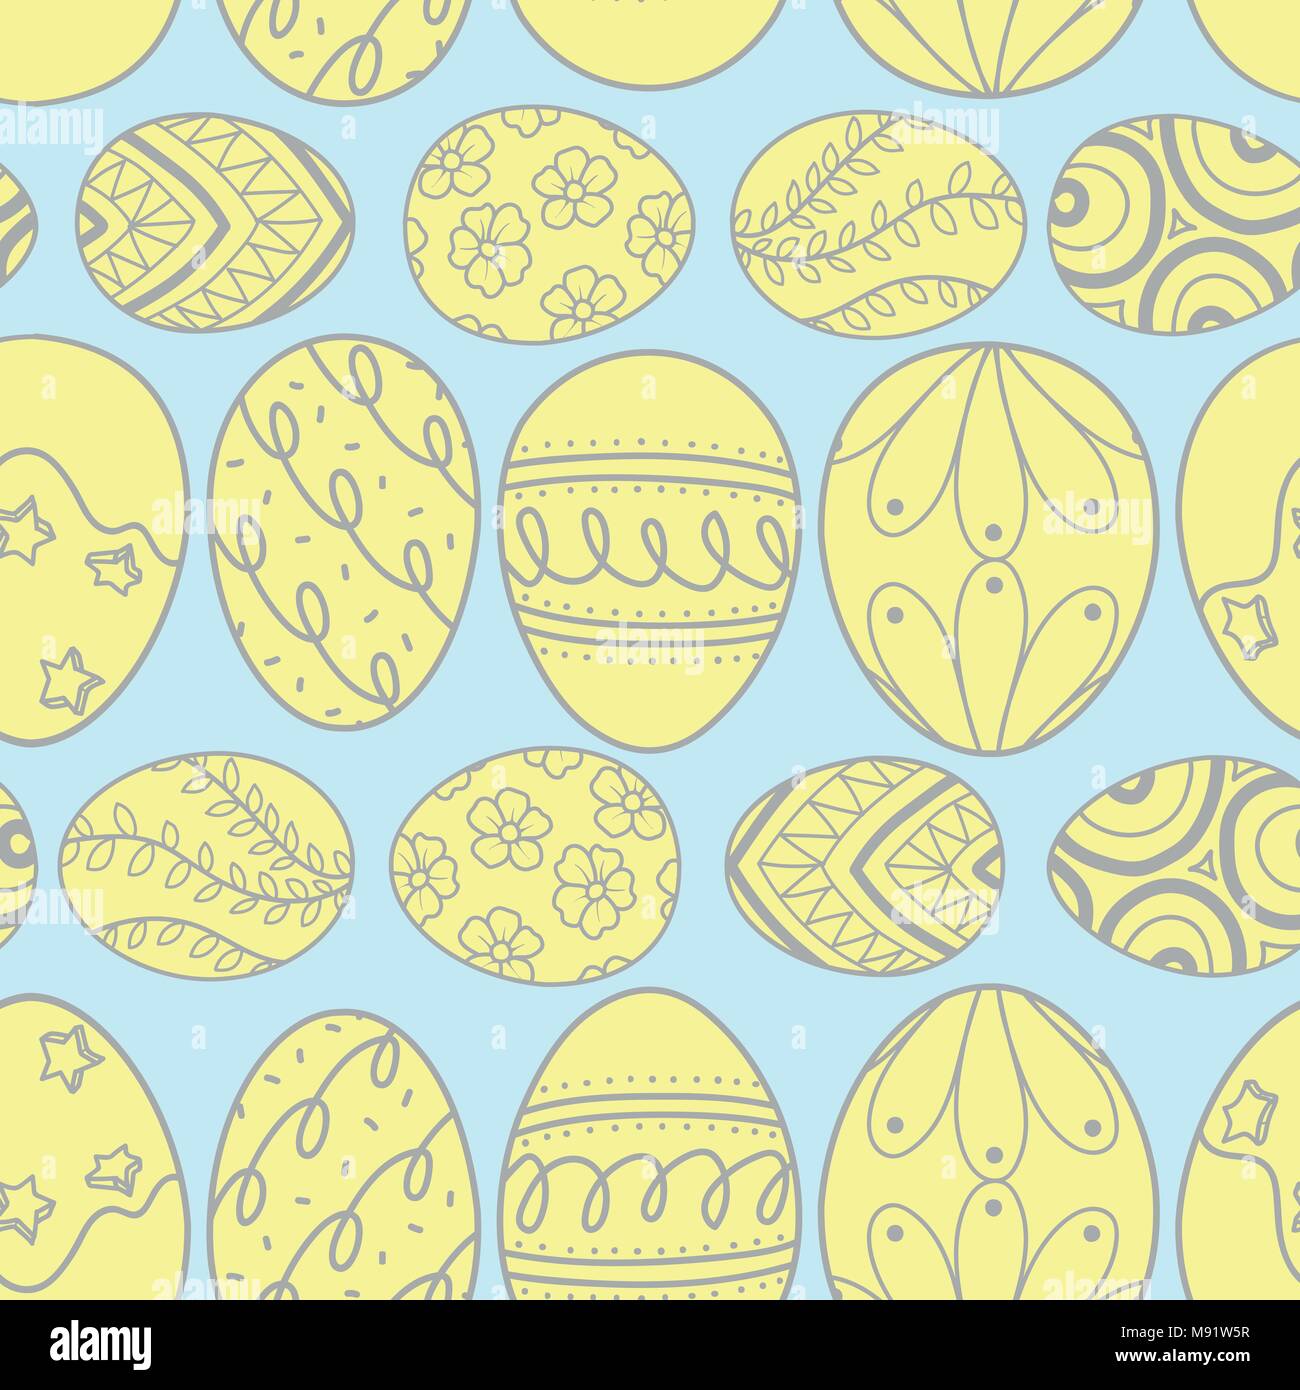 Easter eggs in gray outline and yellow plane line up on blue background. Cute hand drawn seamless pattern design for Easter festival in vector illustr Stock Vector